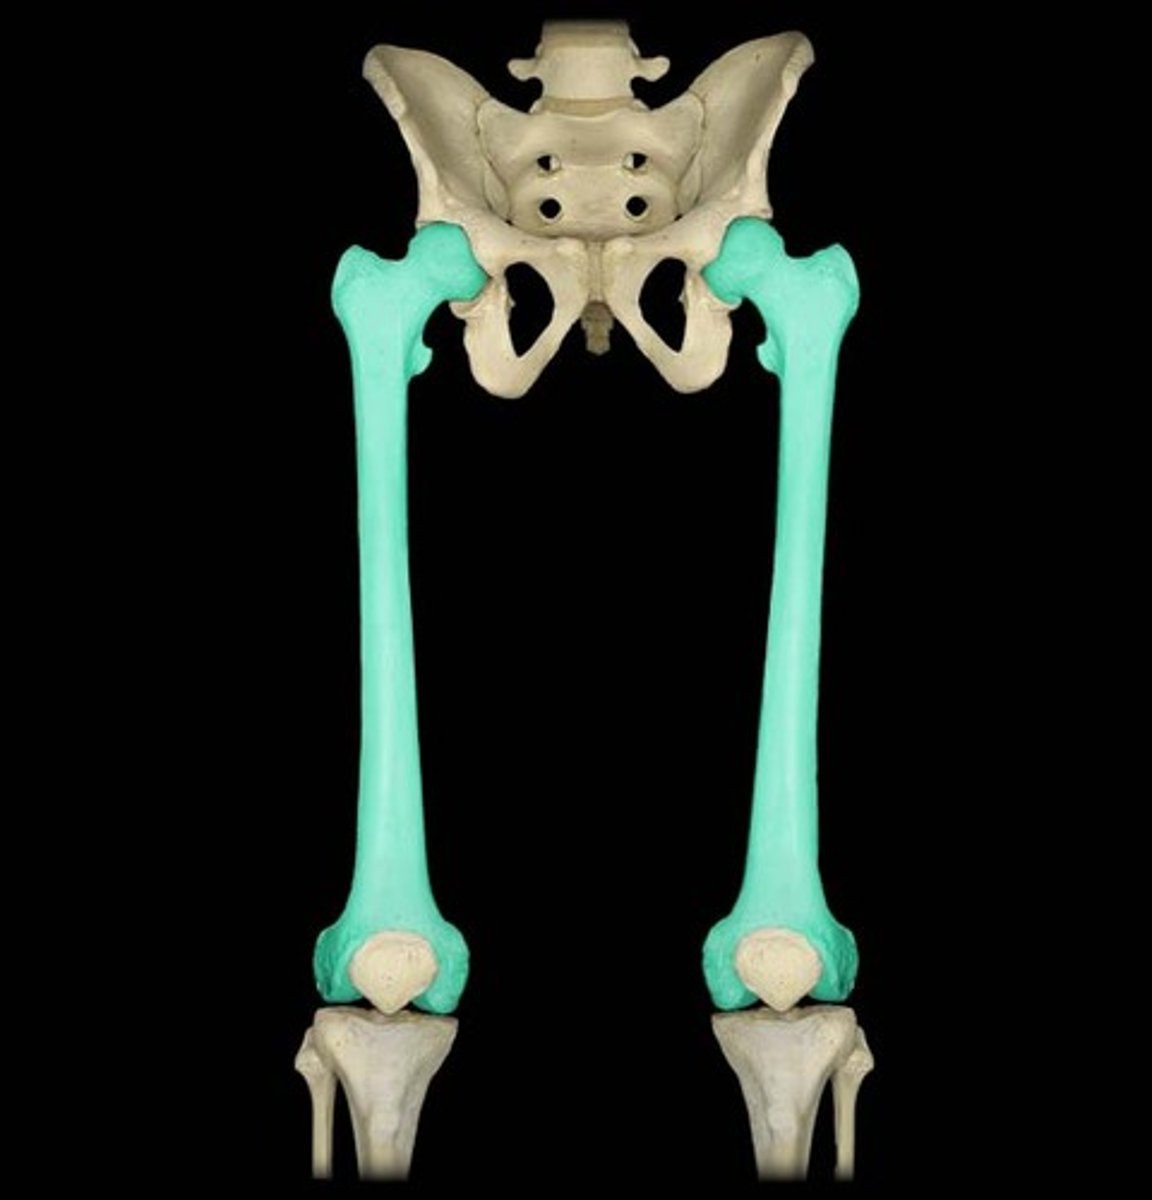 <p>Landmarks: femoral head and neck</p><p>- Femoracetabular joint(hip joint, proximal)</p><p>- tibiofemoral and patella femoral joint(distal)</p>